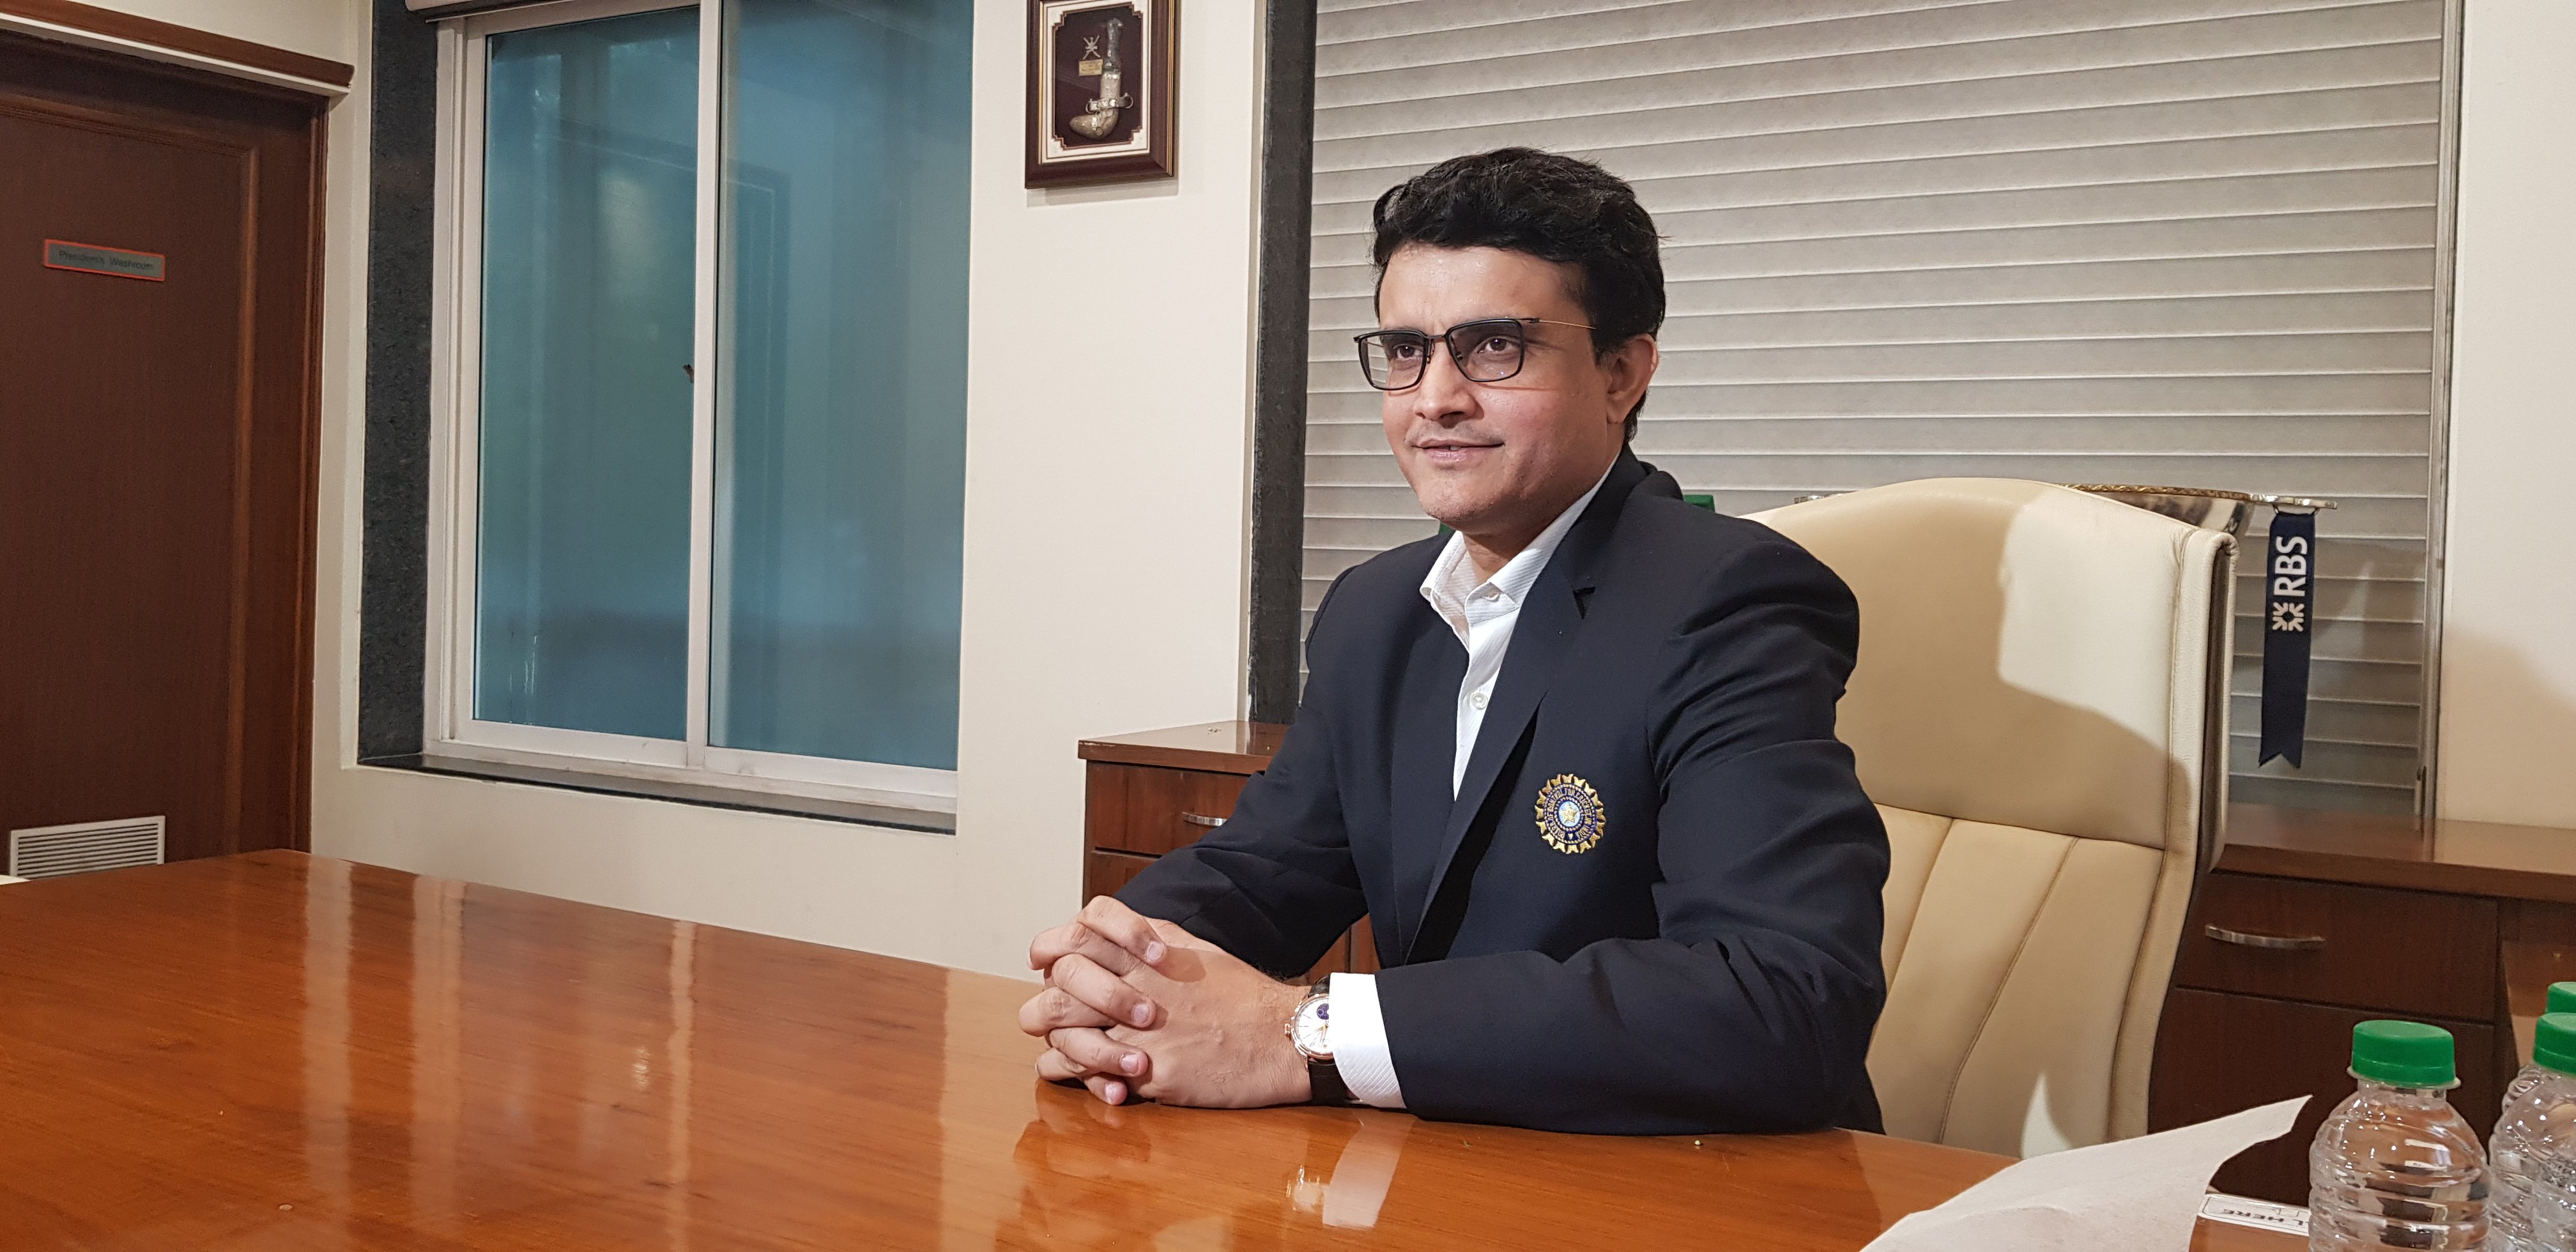 Super Series ODI aims for quality cricket, asserts Sourav Ganguly